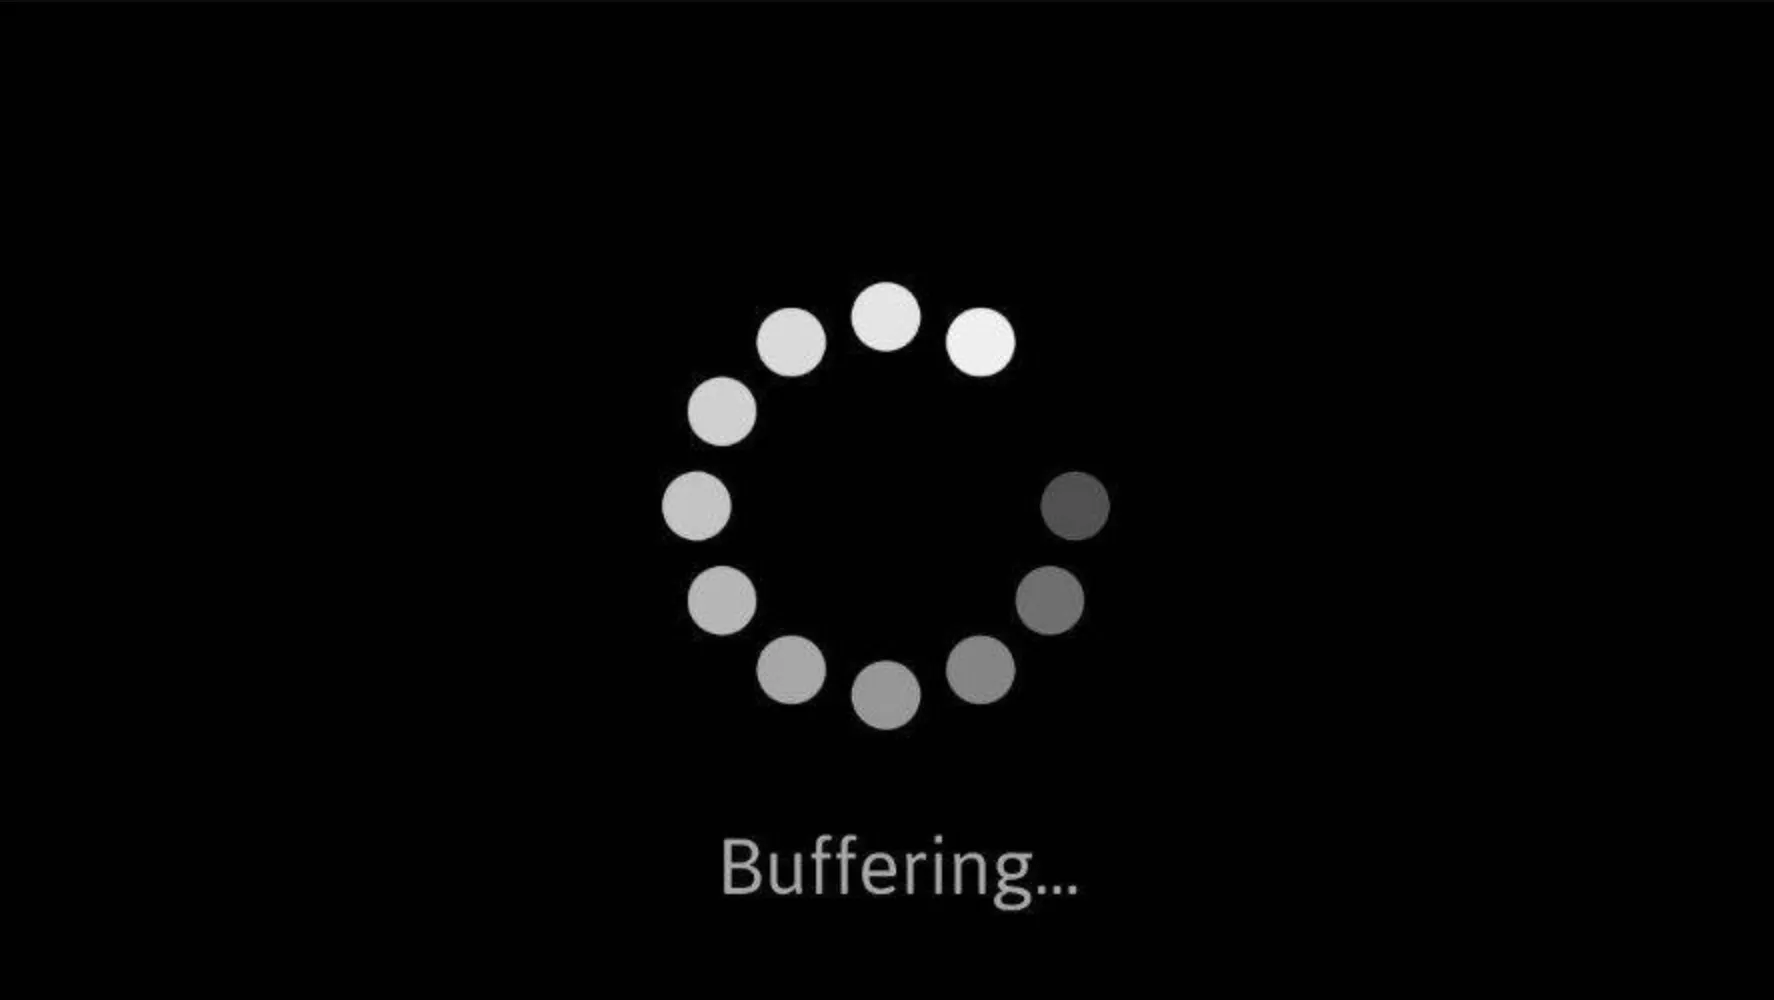 Image of a buffering screen